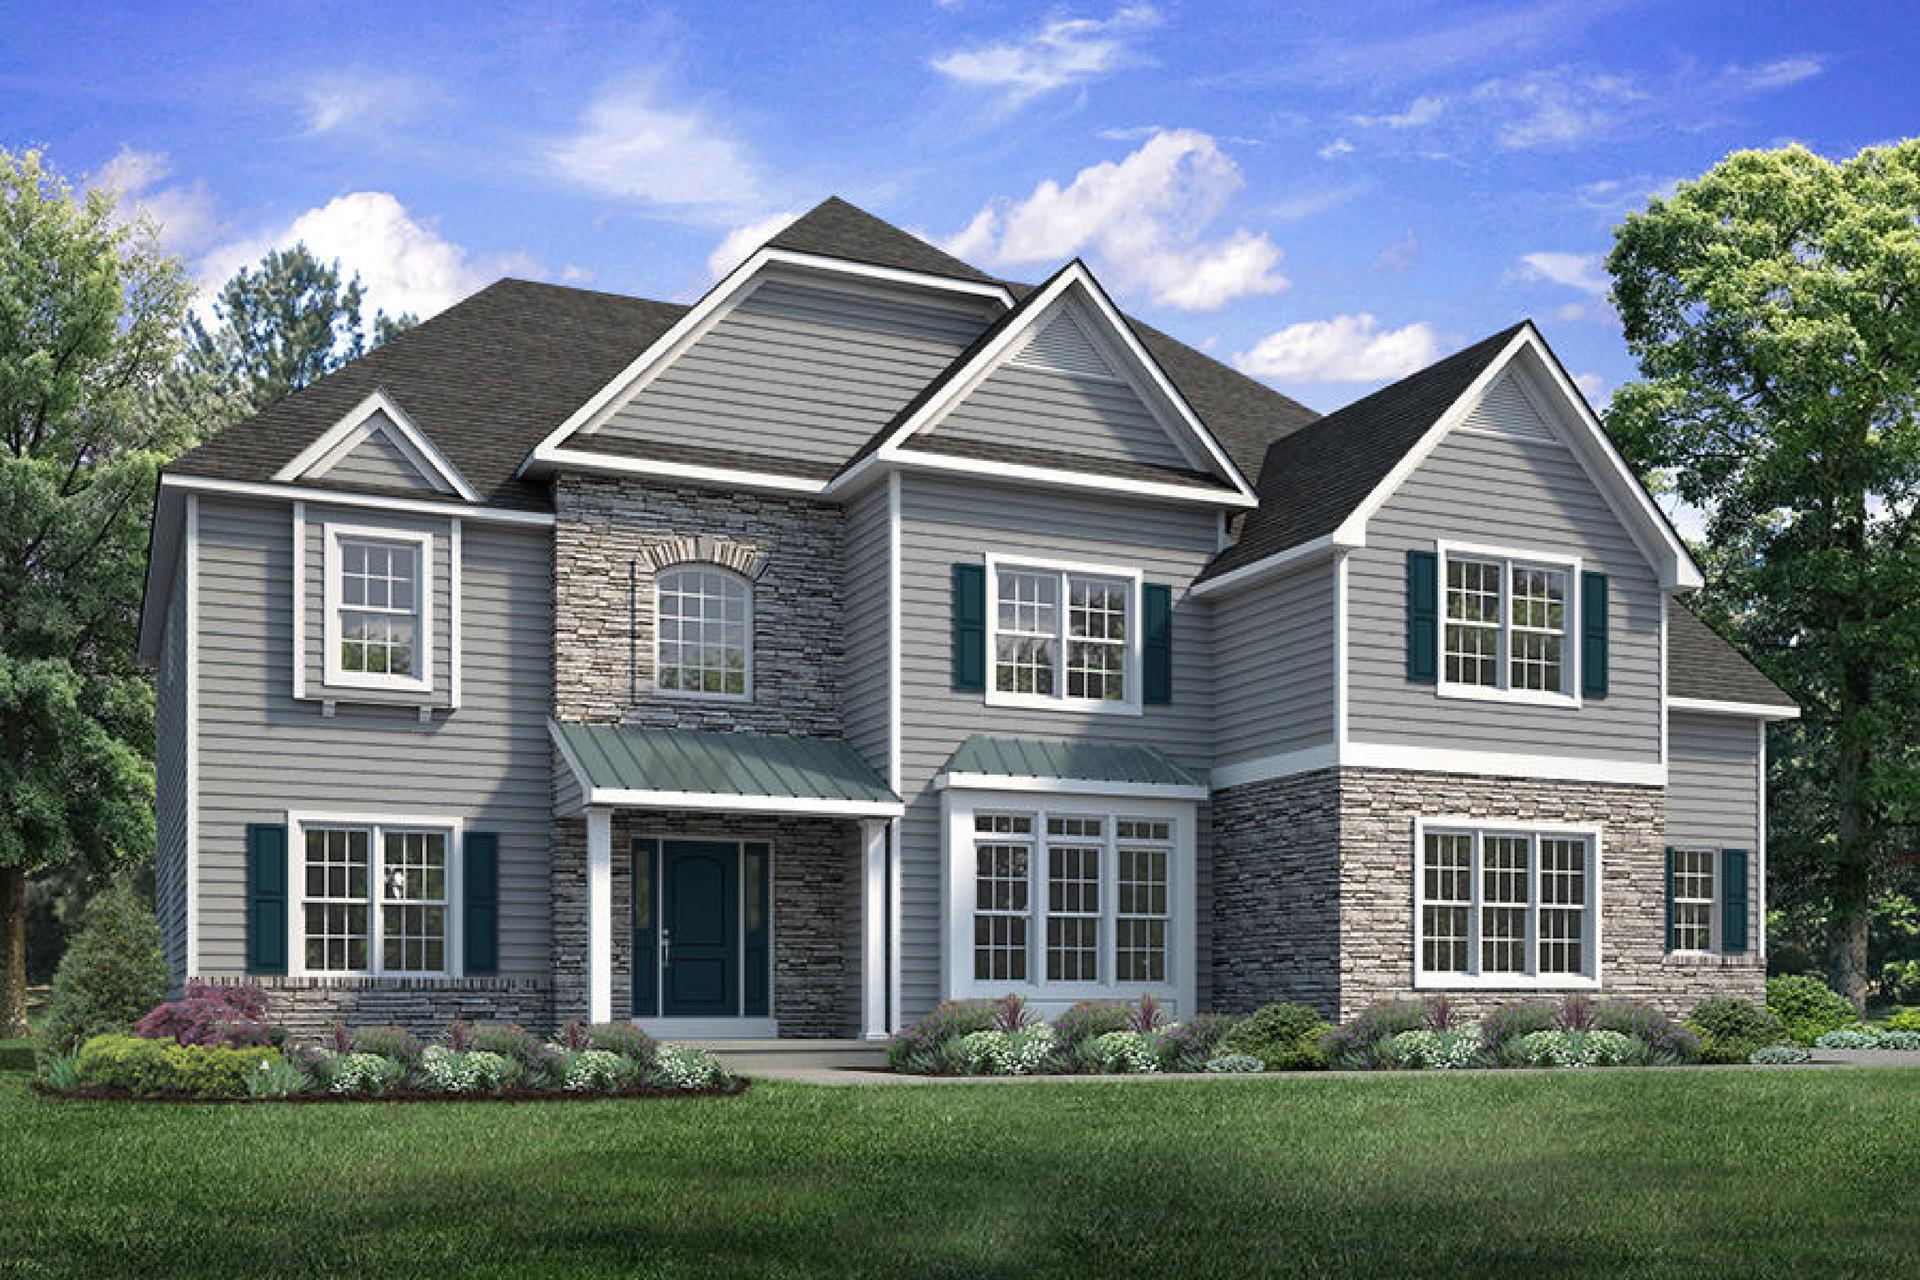 The Preakness New Home in Easton PA - Riverview Estates